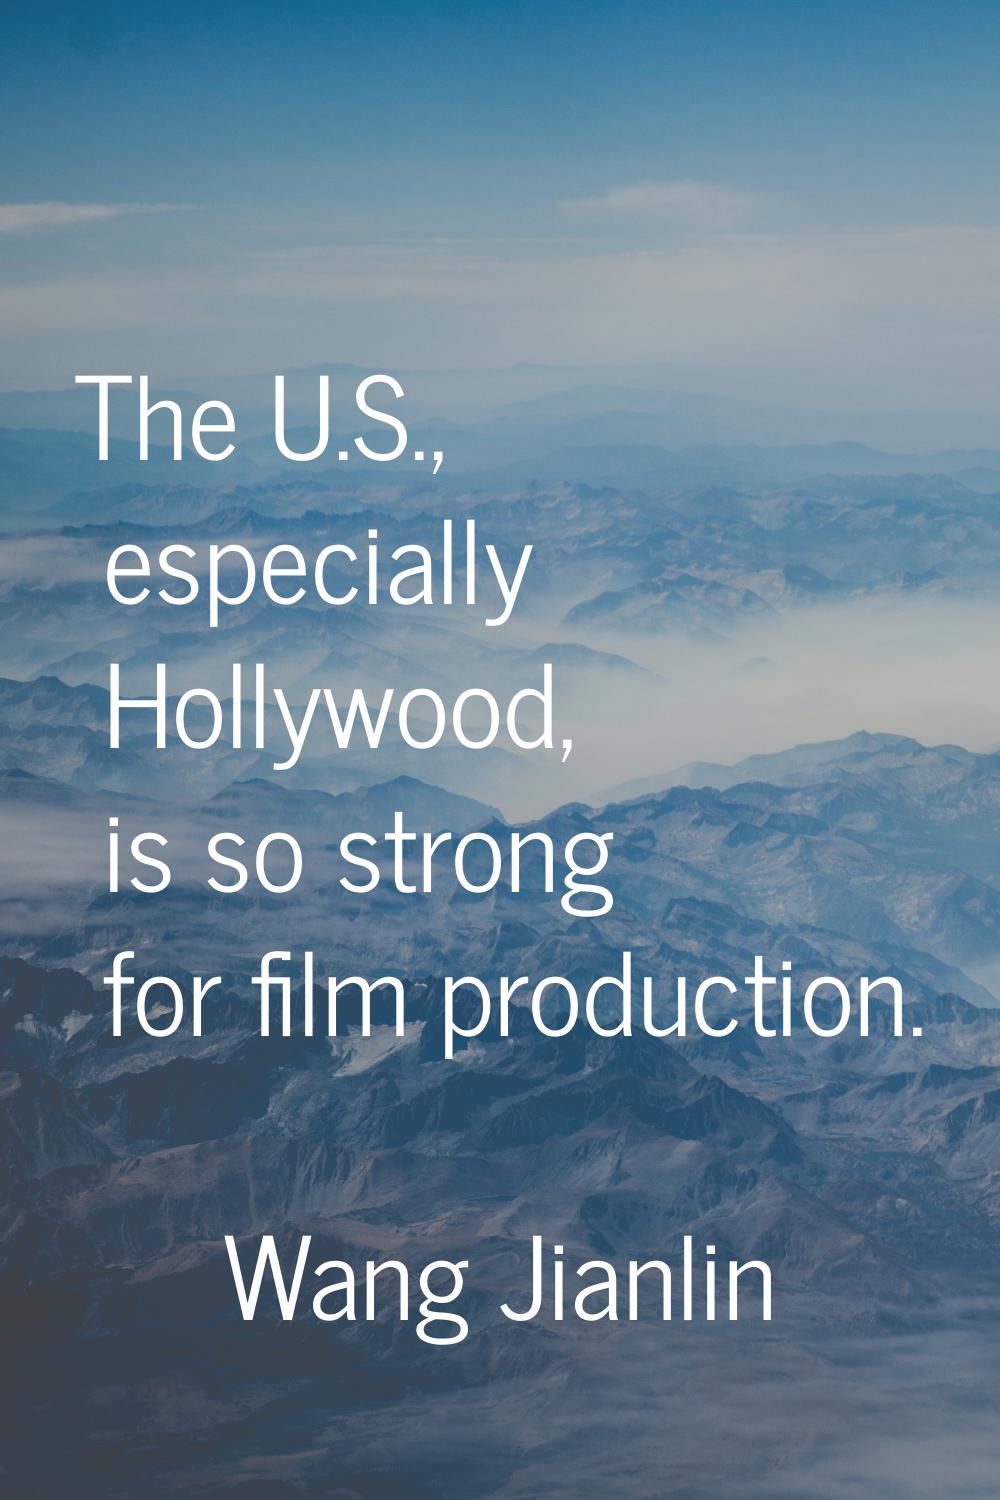 The U.S., especially Hollywood, is so strong for film production.